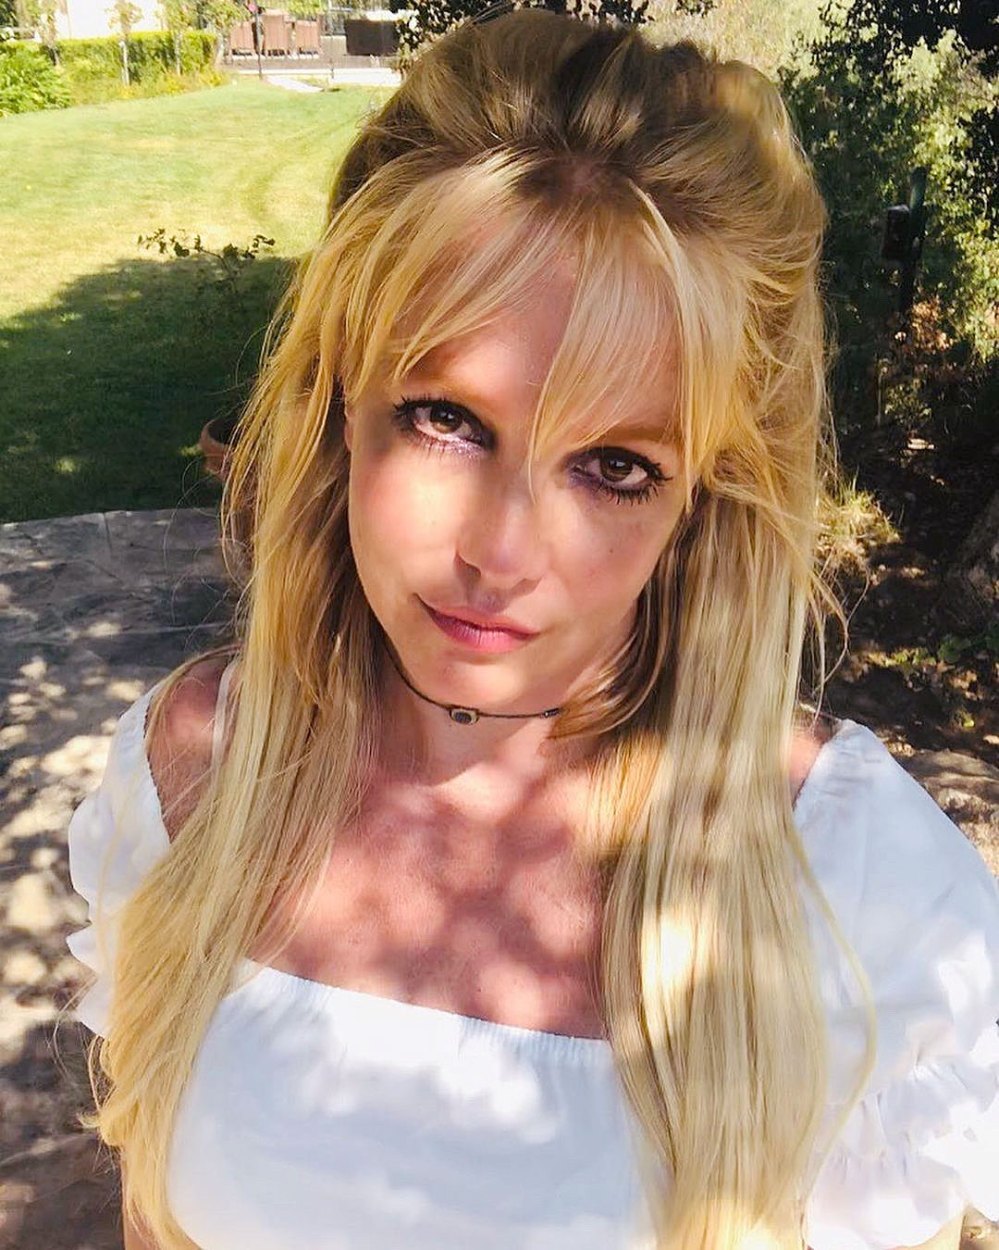 Britney Spears Says Shes the Happiest Shes Ever Been Amid Conservatorship Battle